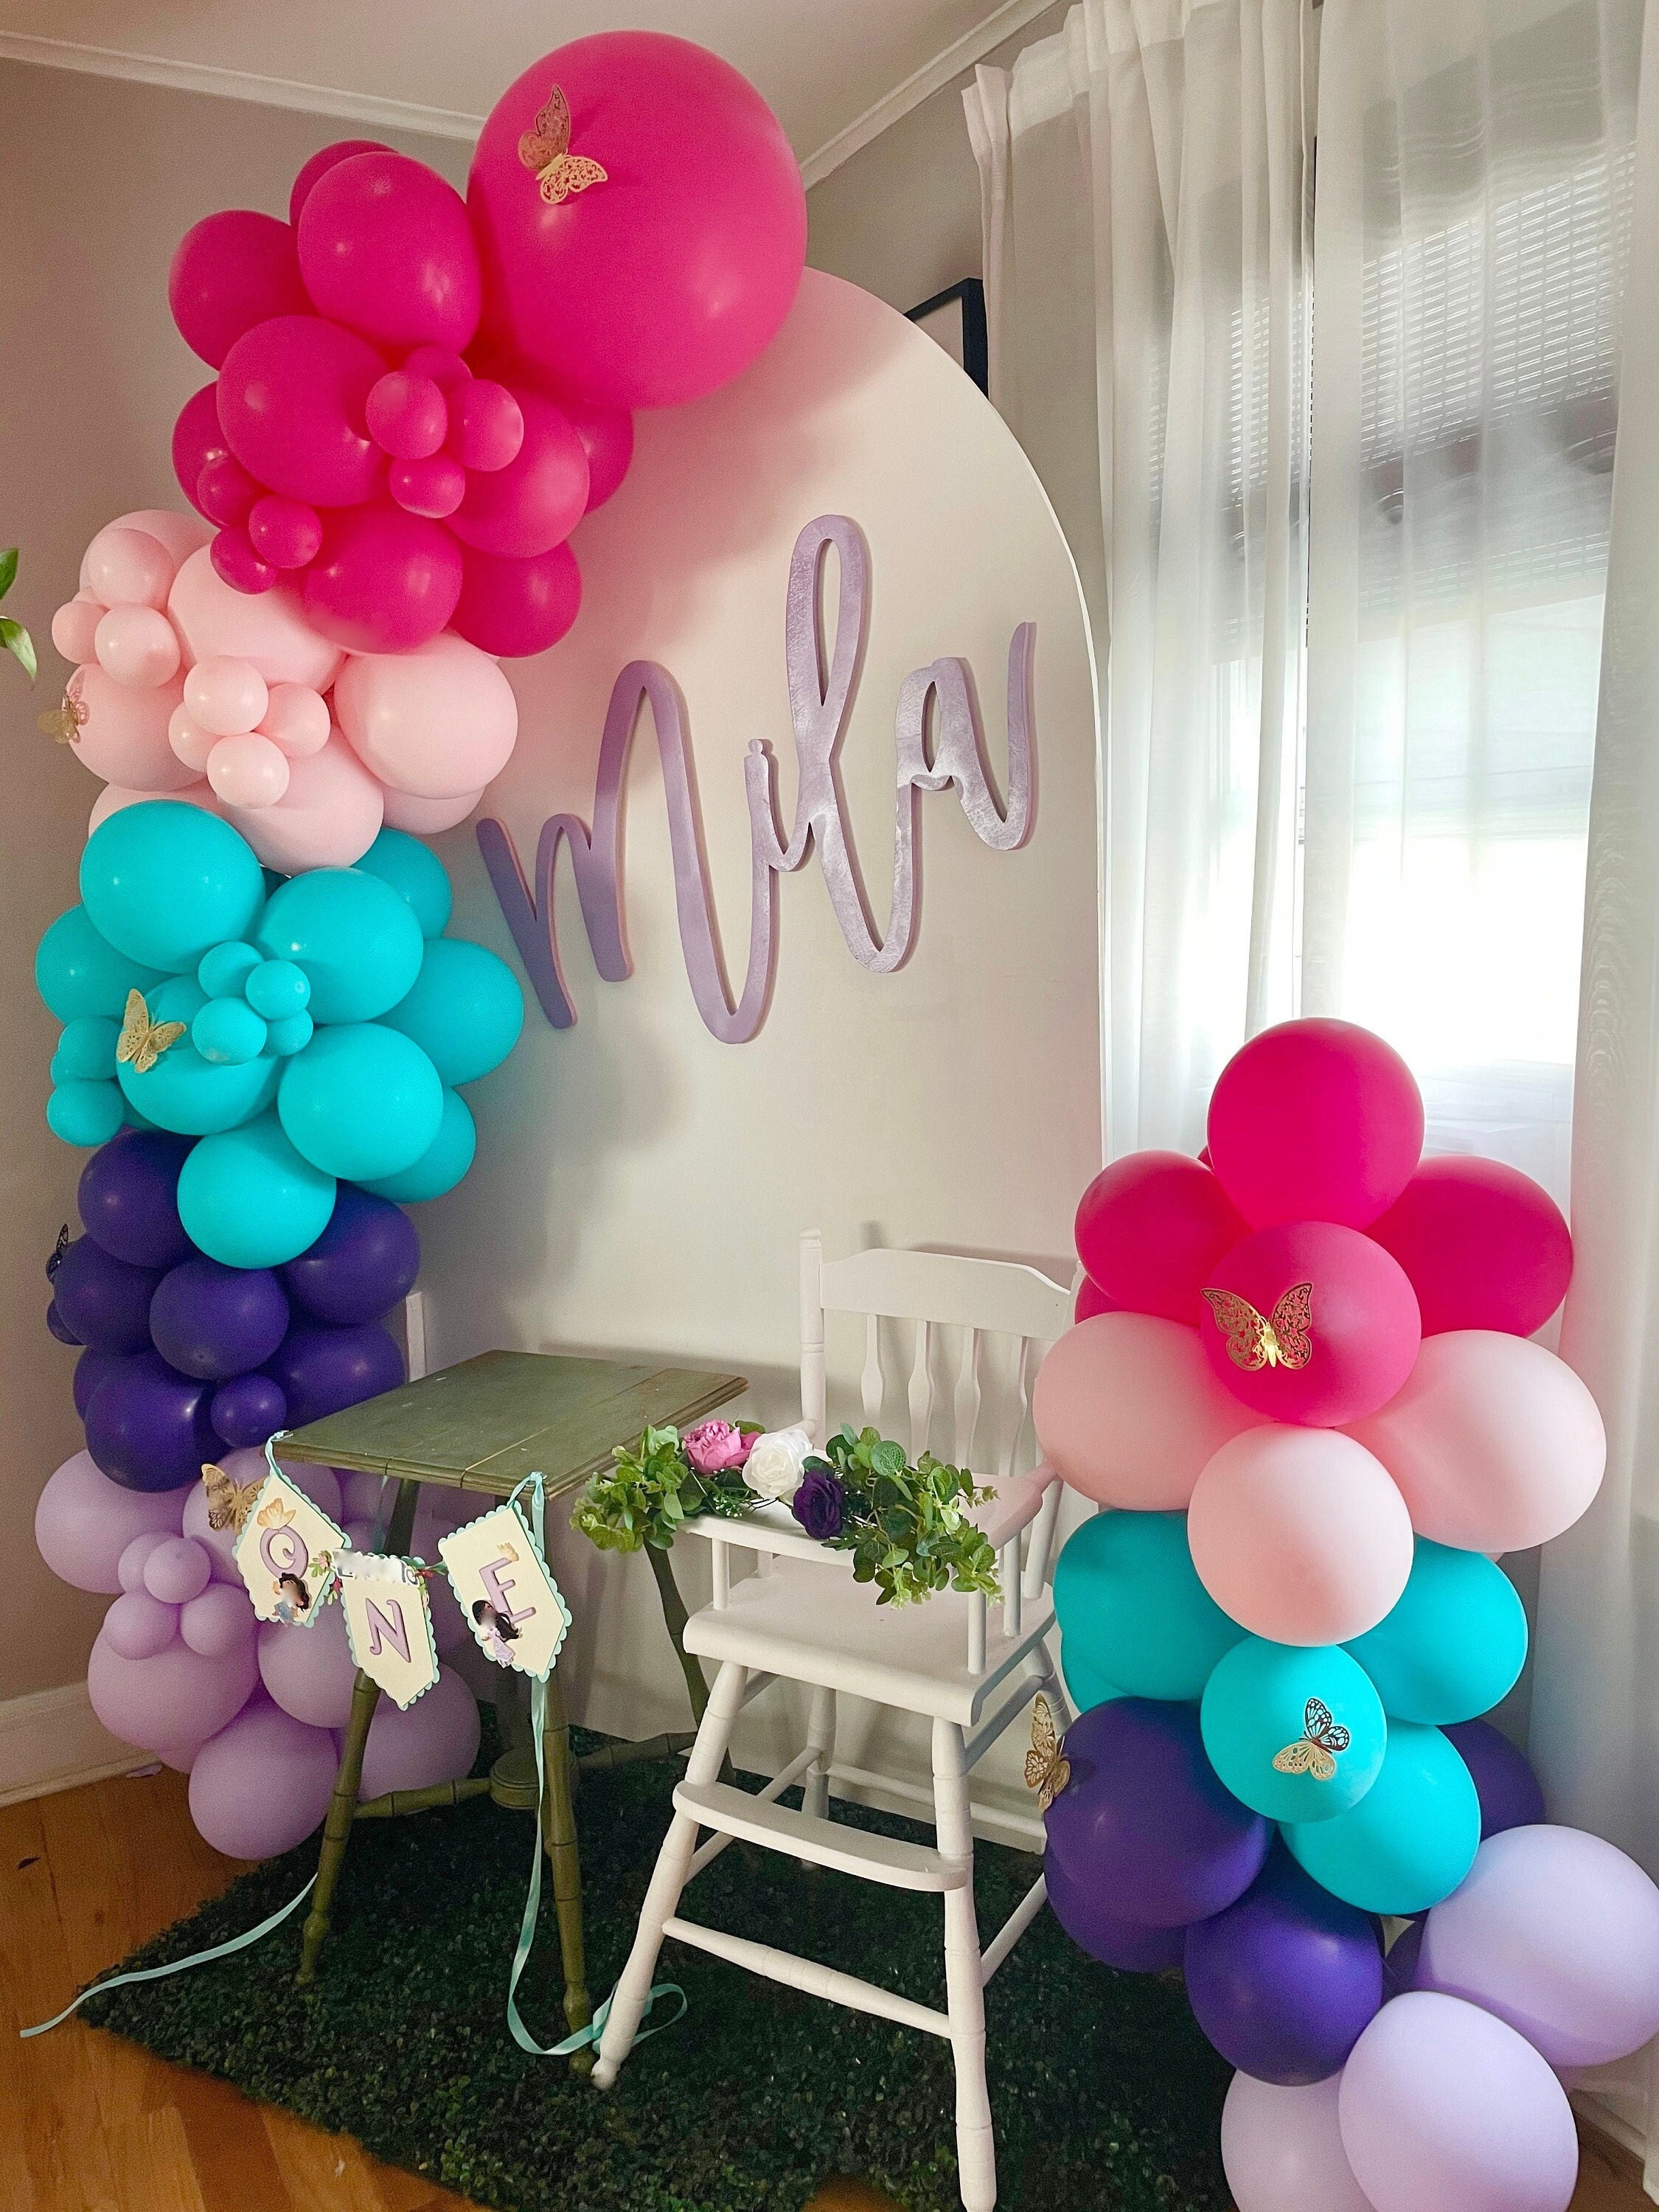 109Pcs Gender Reveal Decorations Boy or Girl Gender Reveal Party Supplies  Including Balloons Tablecloths Backdrop Cake Toppers Fringe Curtains Tissue